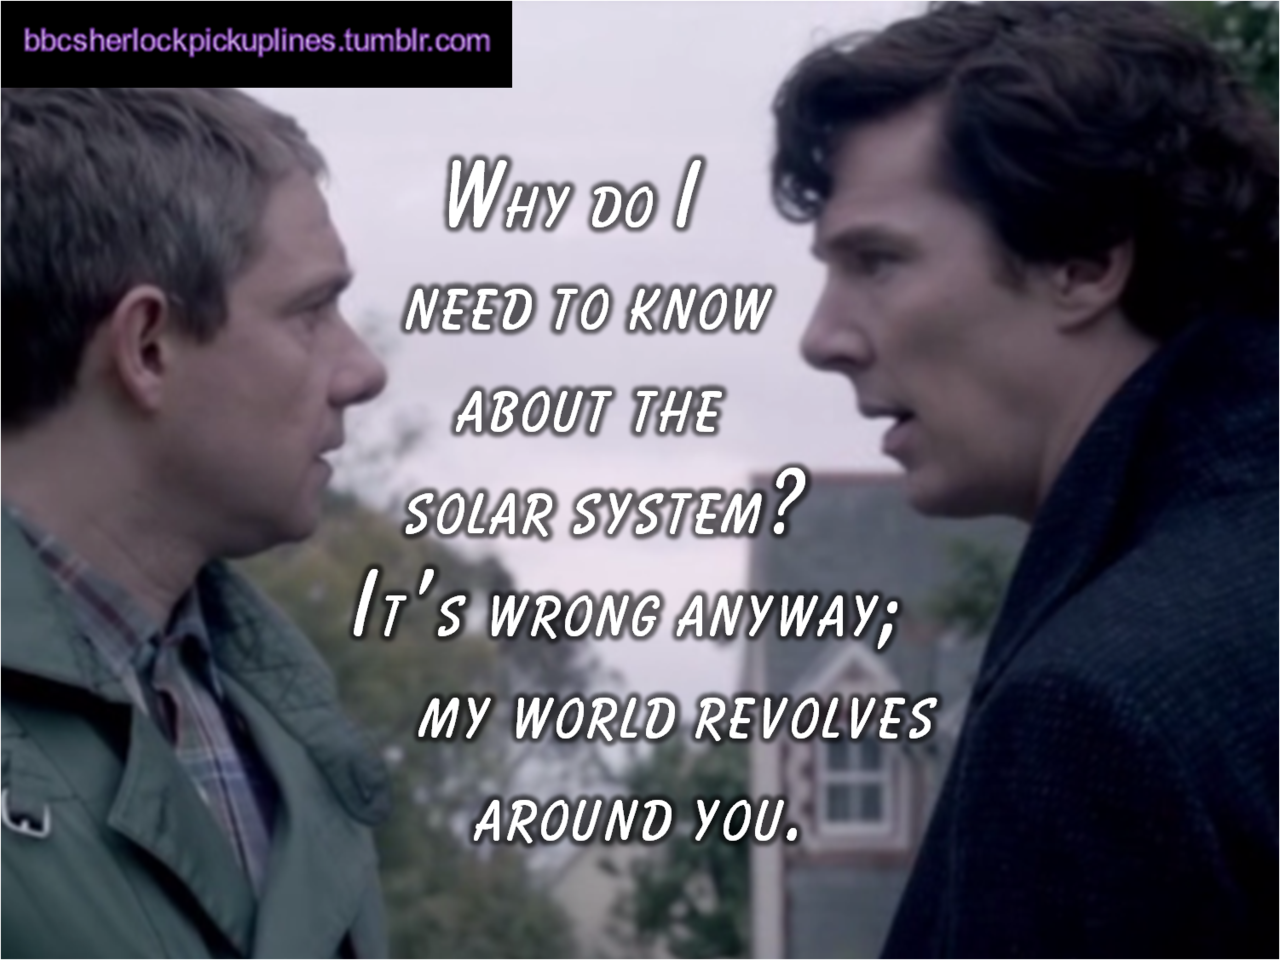 The best of submissions, from BBC Sherlock pick-up lines.